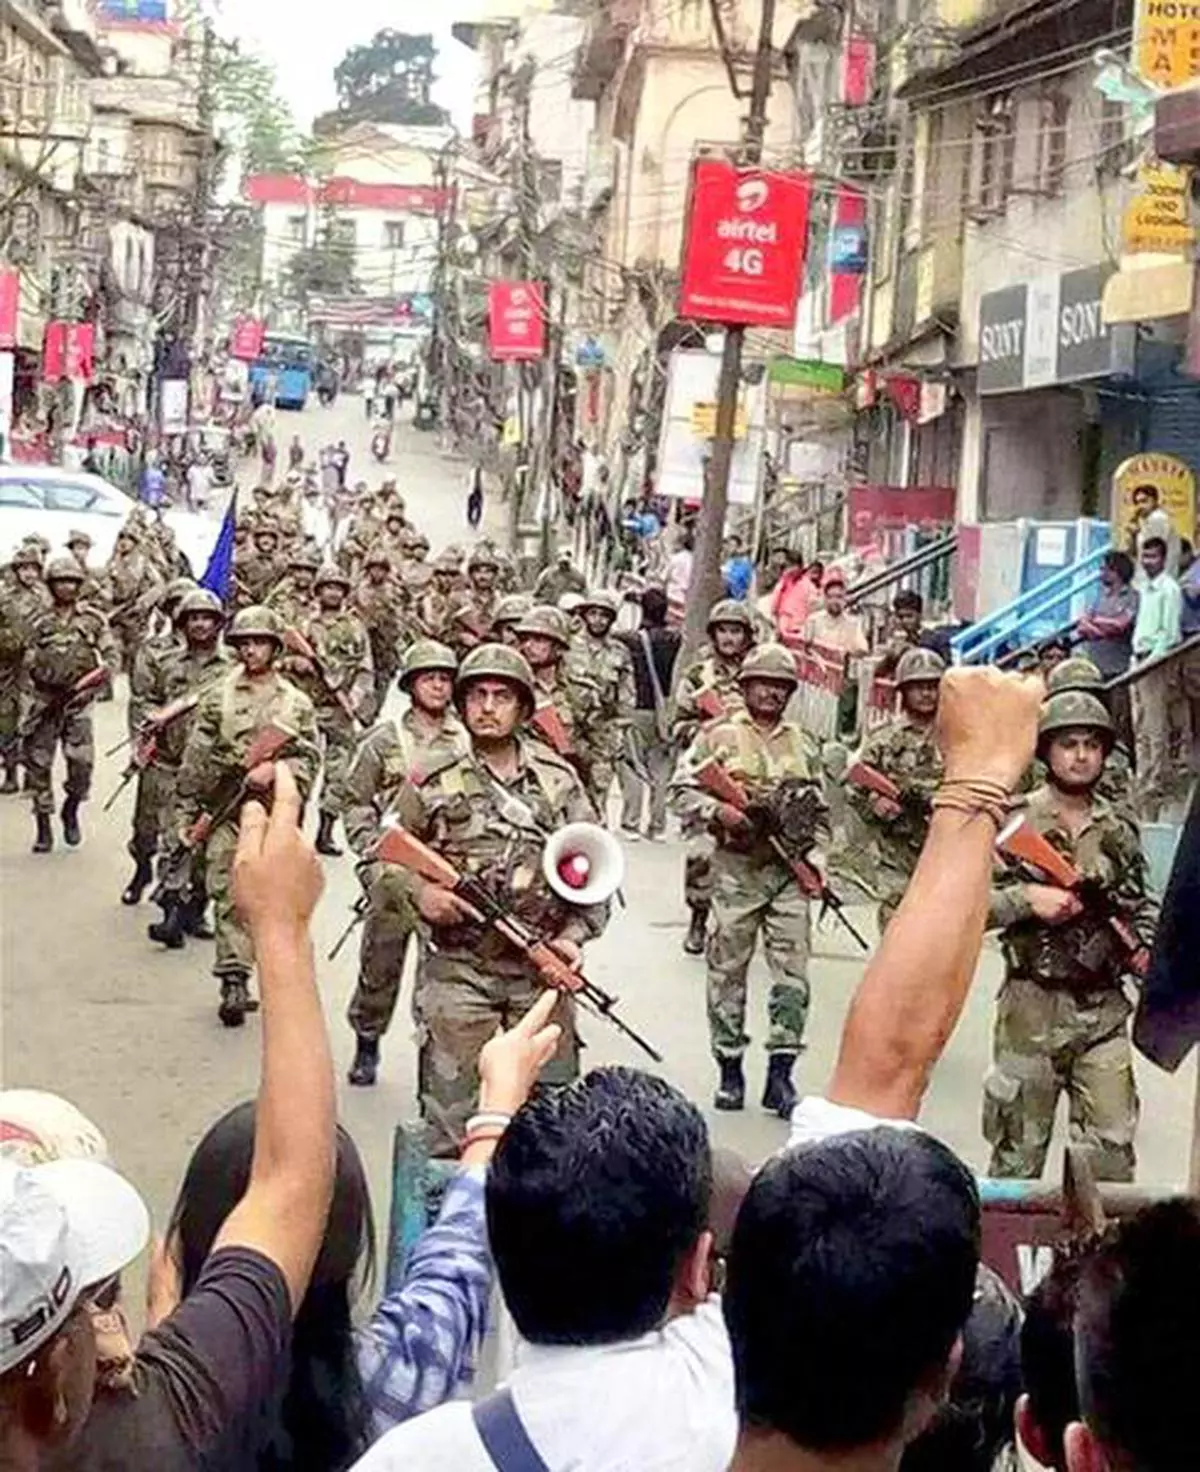 CRPF troops patrol the streets, a day after supporters of the Gorkha Janmukti Morcha (GJM) resorted to violence